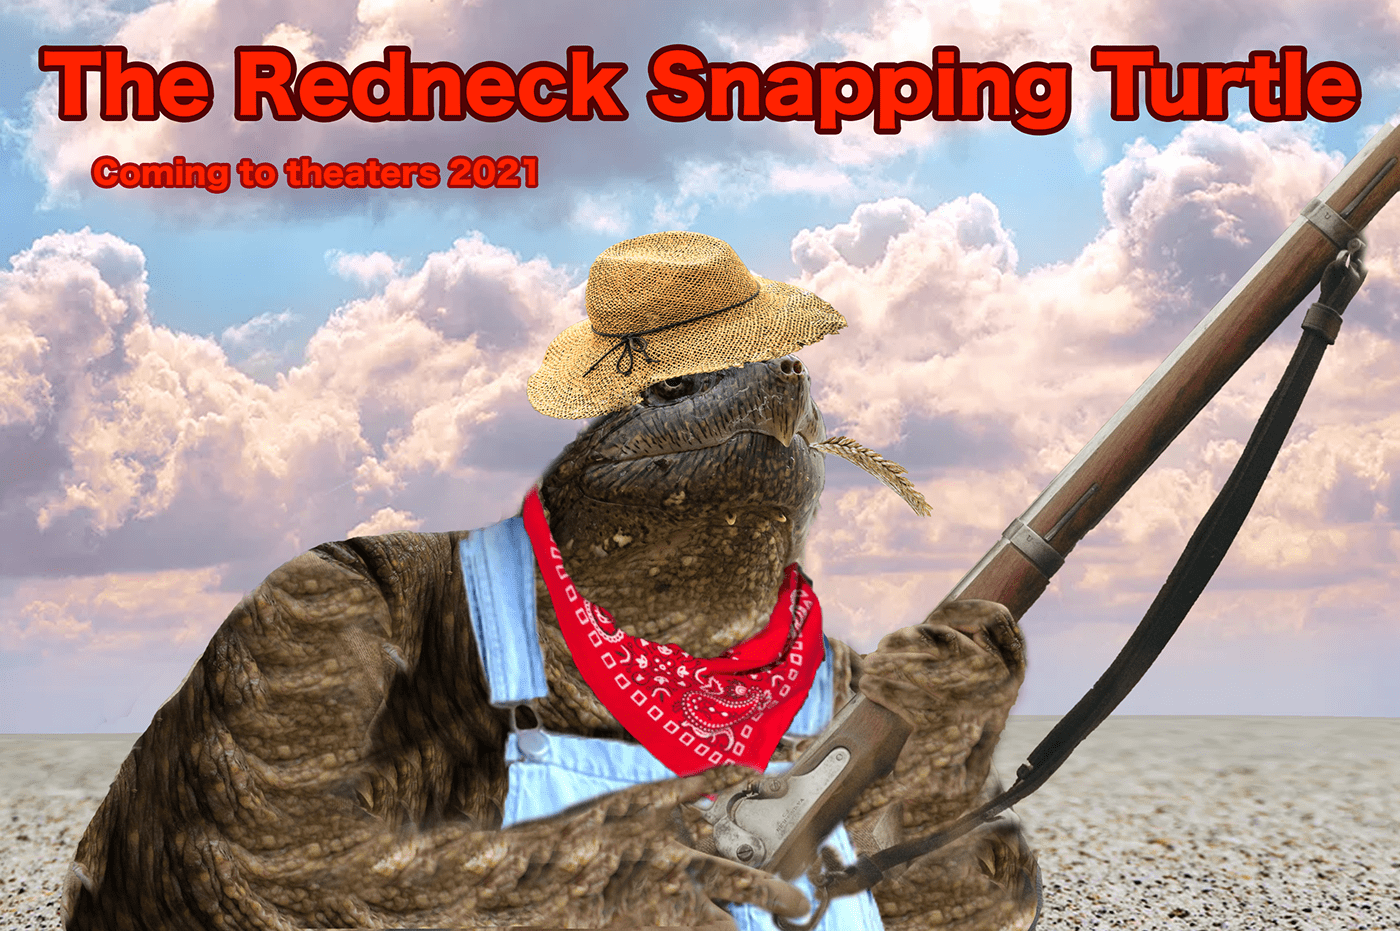 animal funny graphic desighn photoshop Project redneck snapping turtle Turtle